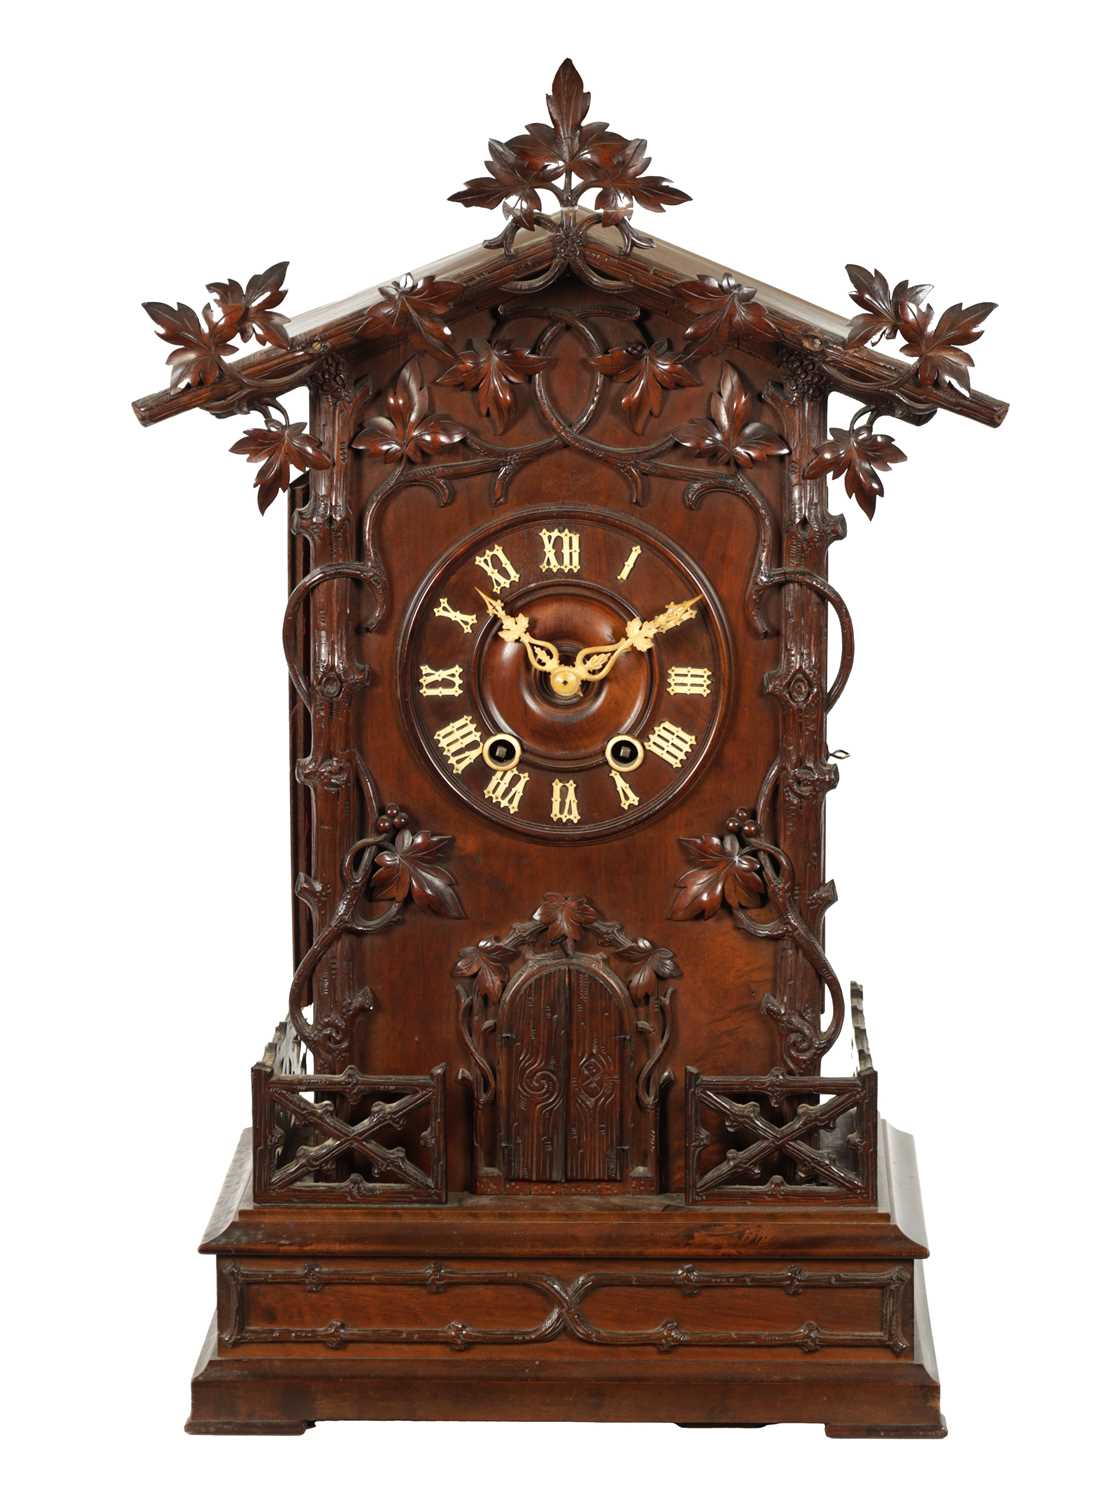 A LARGE LATE 19TH CENTURY BLACK FOREST TRUMPETER CLOCK